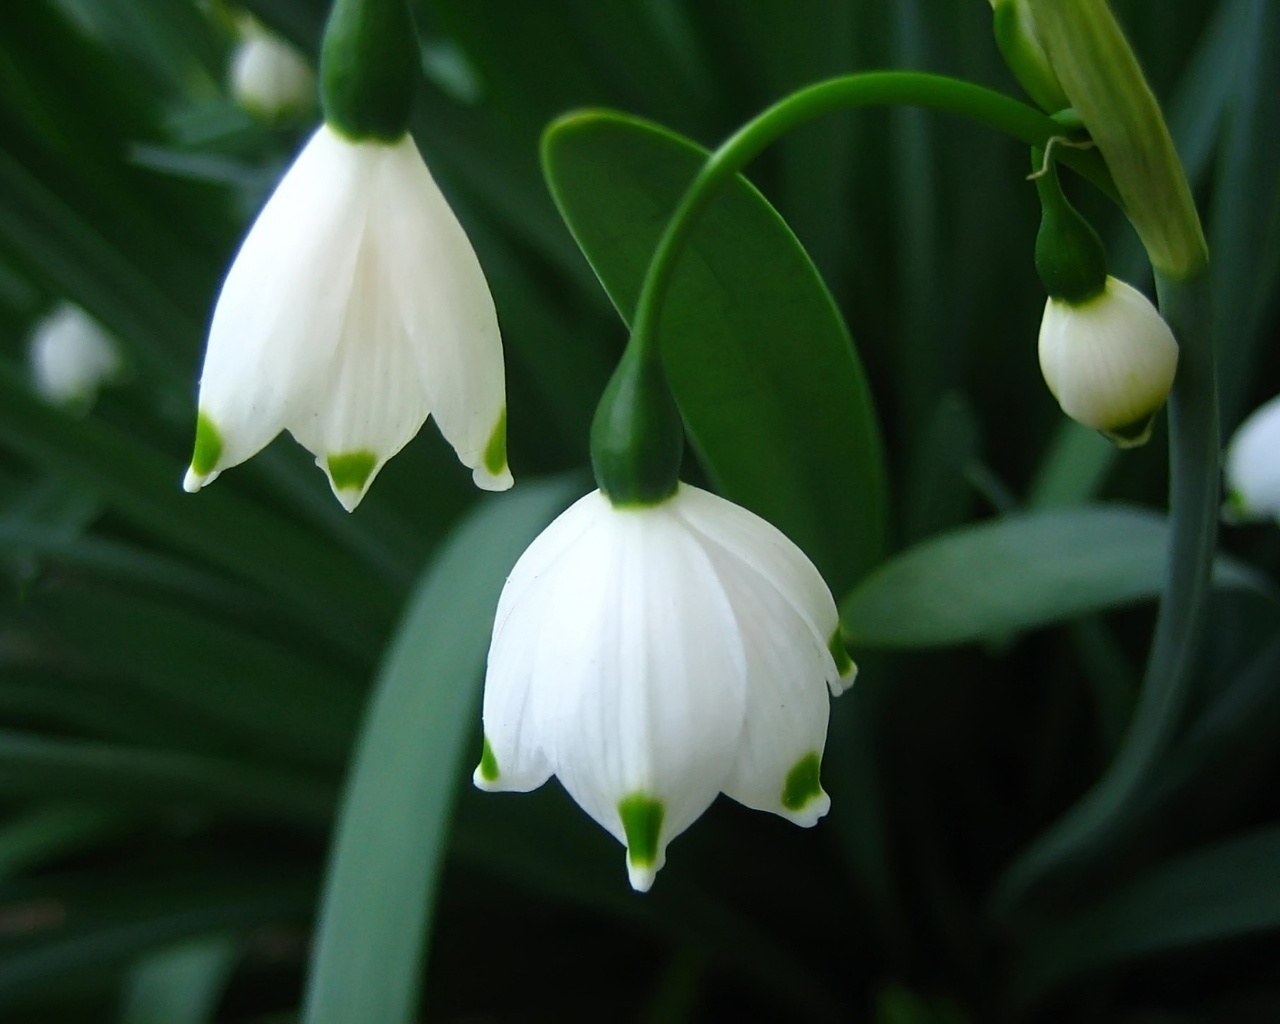 Snowdrops for 1280 x 1024 resolution